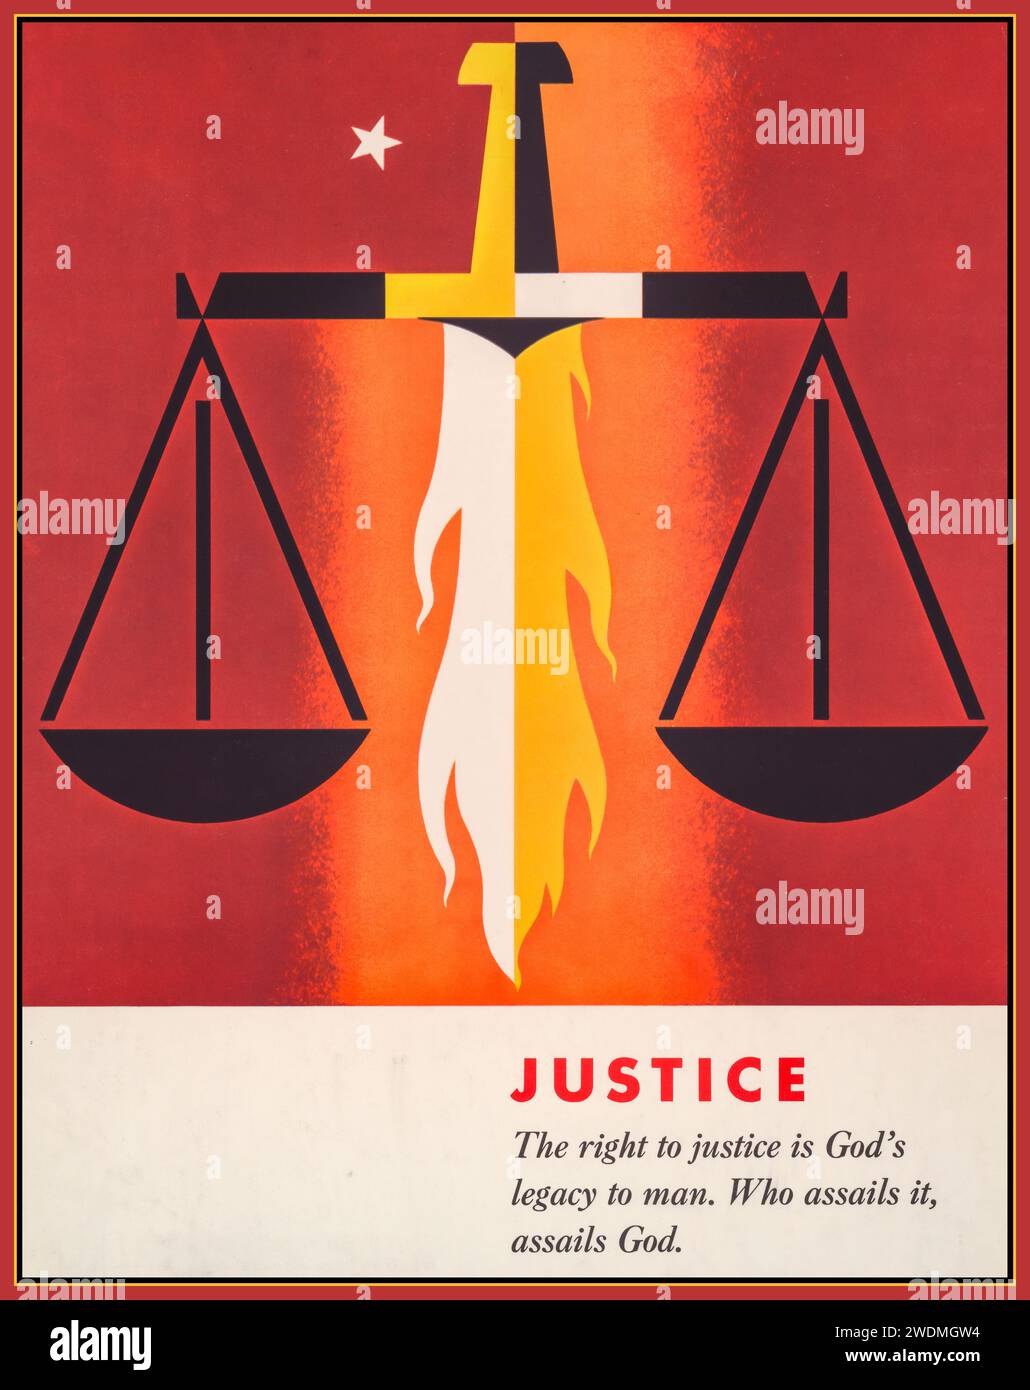 'Justice' vintage 1950s poster illustration. The right to justice is God's legacy to man. Who assails it, assails God. Creator(s): Binder, Joseph, 1898-1972, artist Date Created/Published: [Washington, D.C.,] : U.S. Government Printing Office, 1957. (poster format) Stock Photo